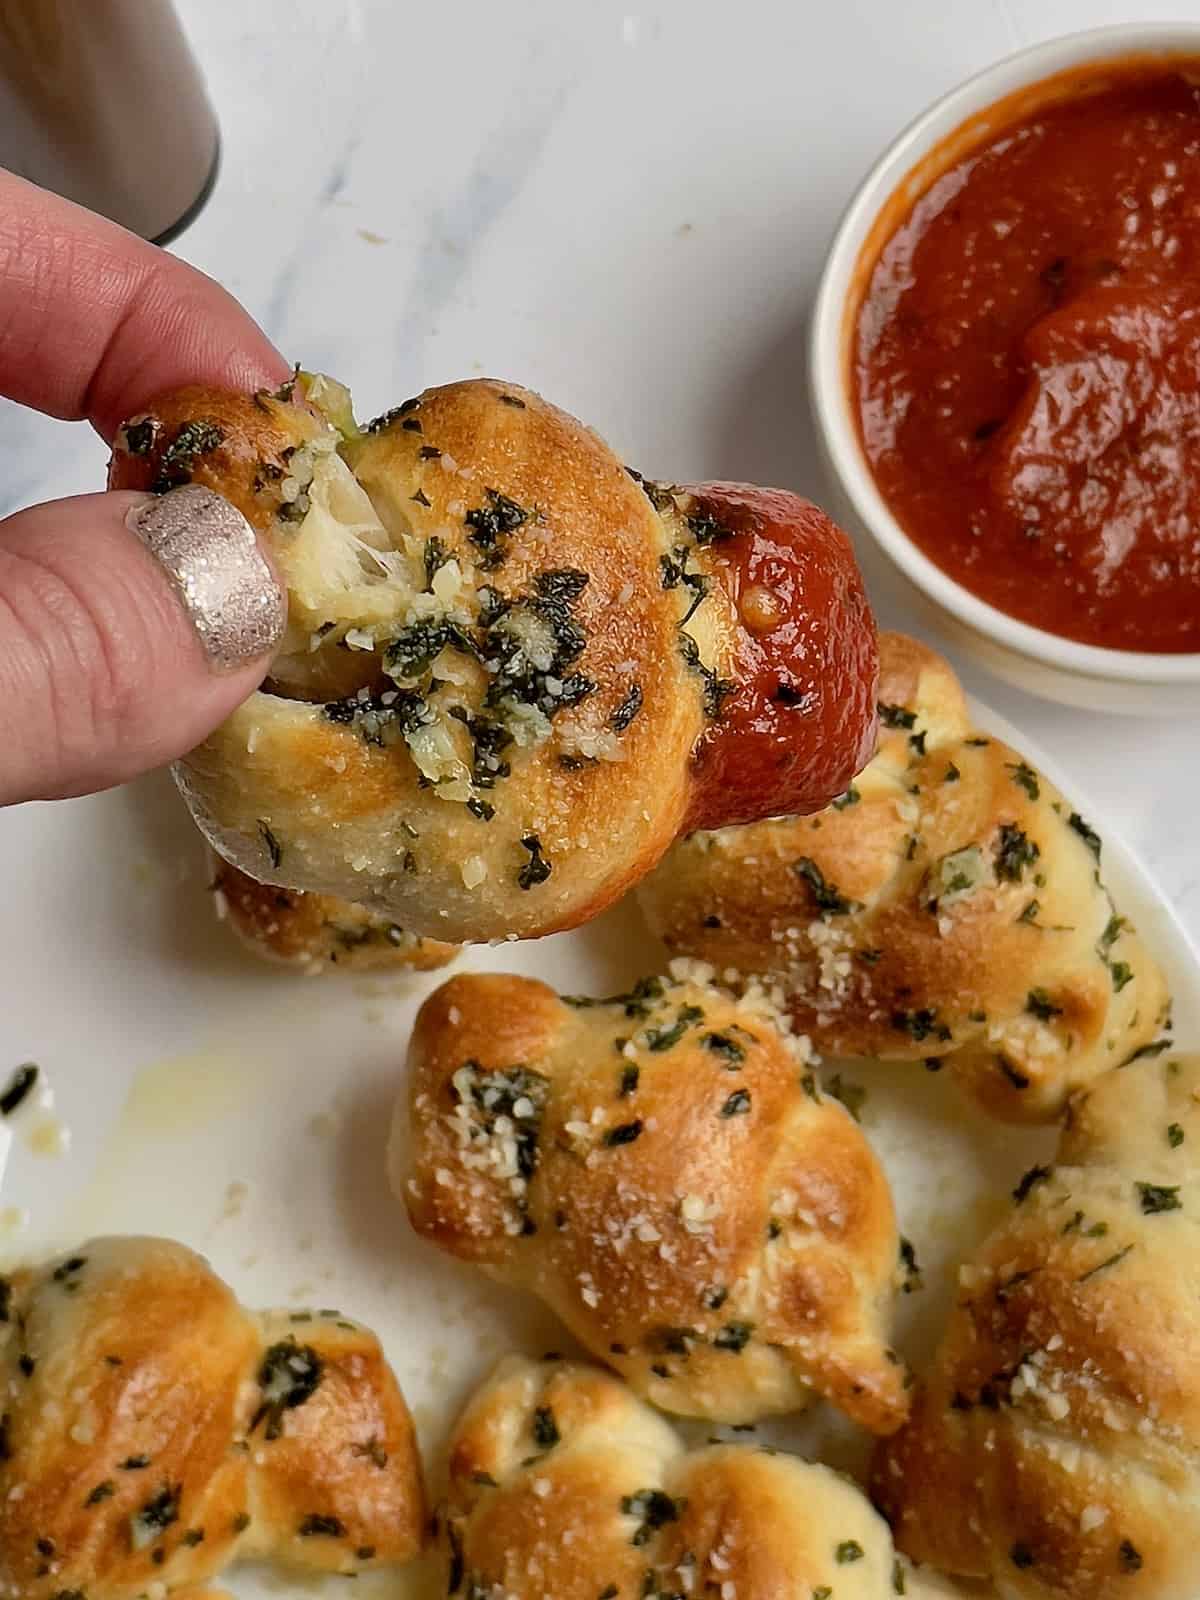 garlic knot being dipped into pizza sauce